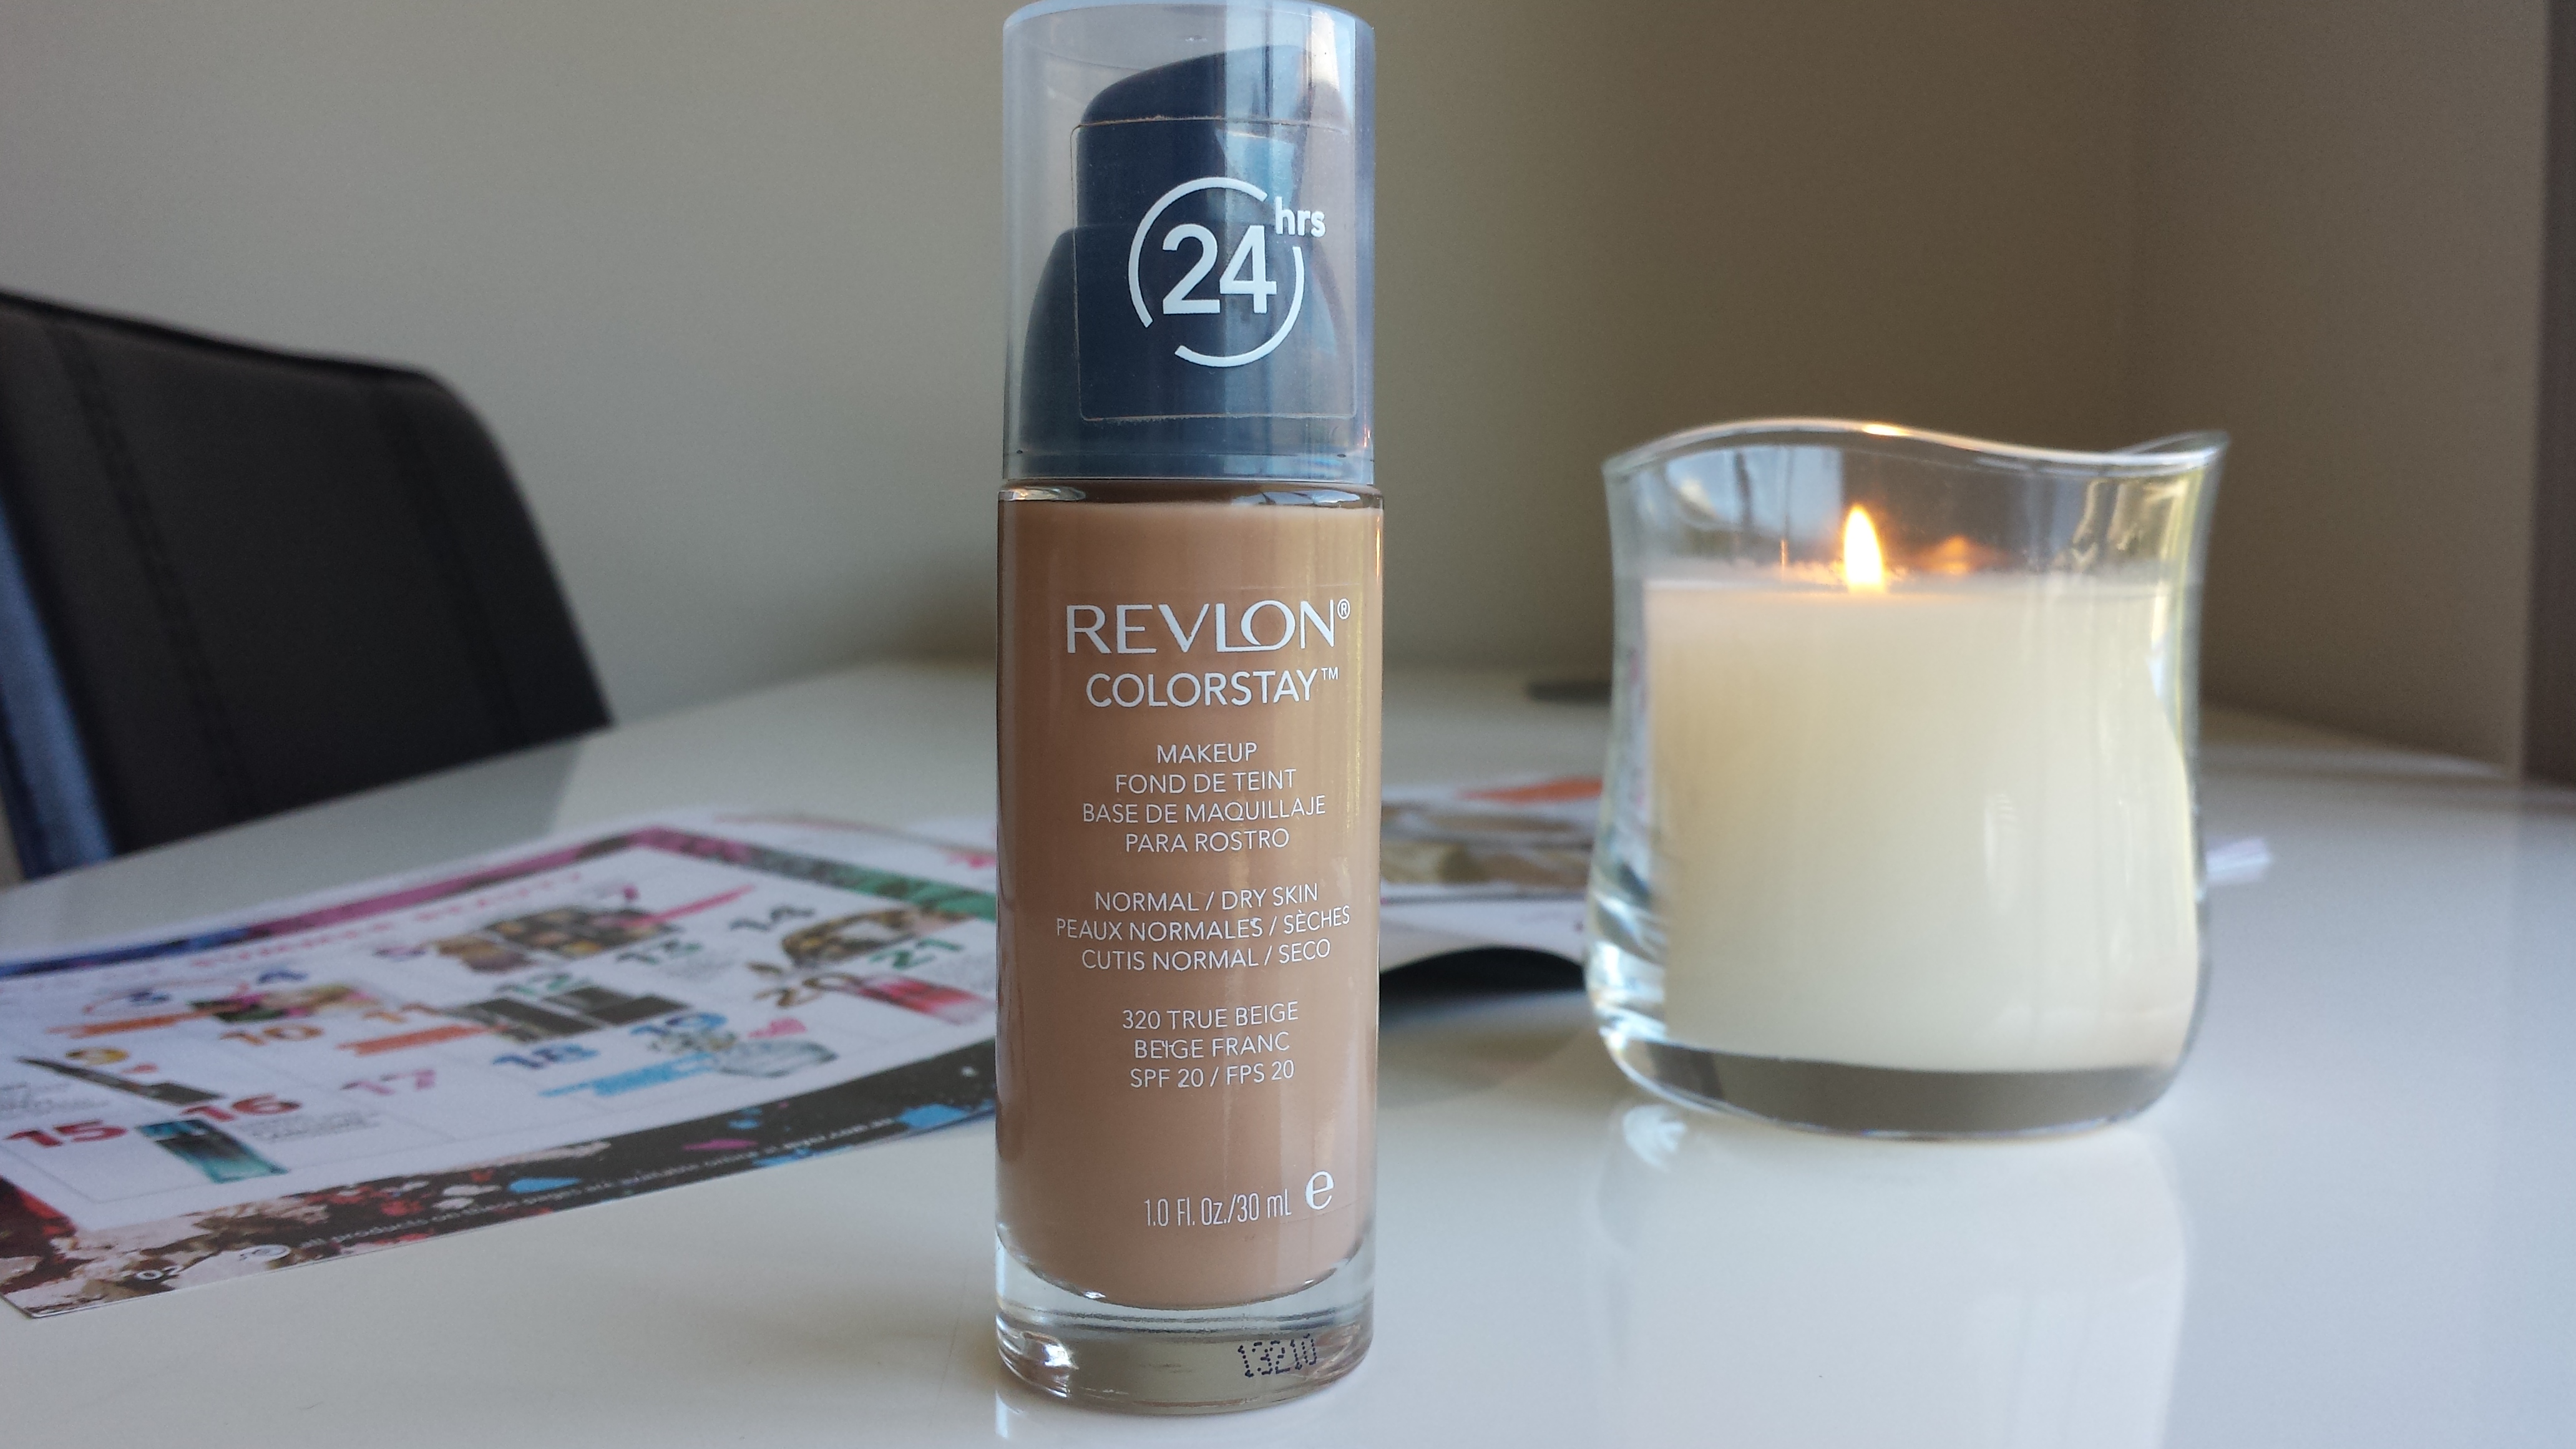 Review Revlon Colorstay Foundation Lipsticks and Coffee.